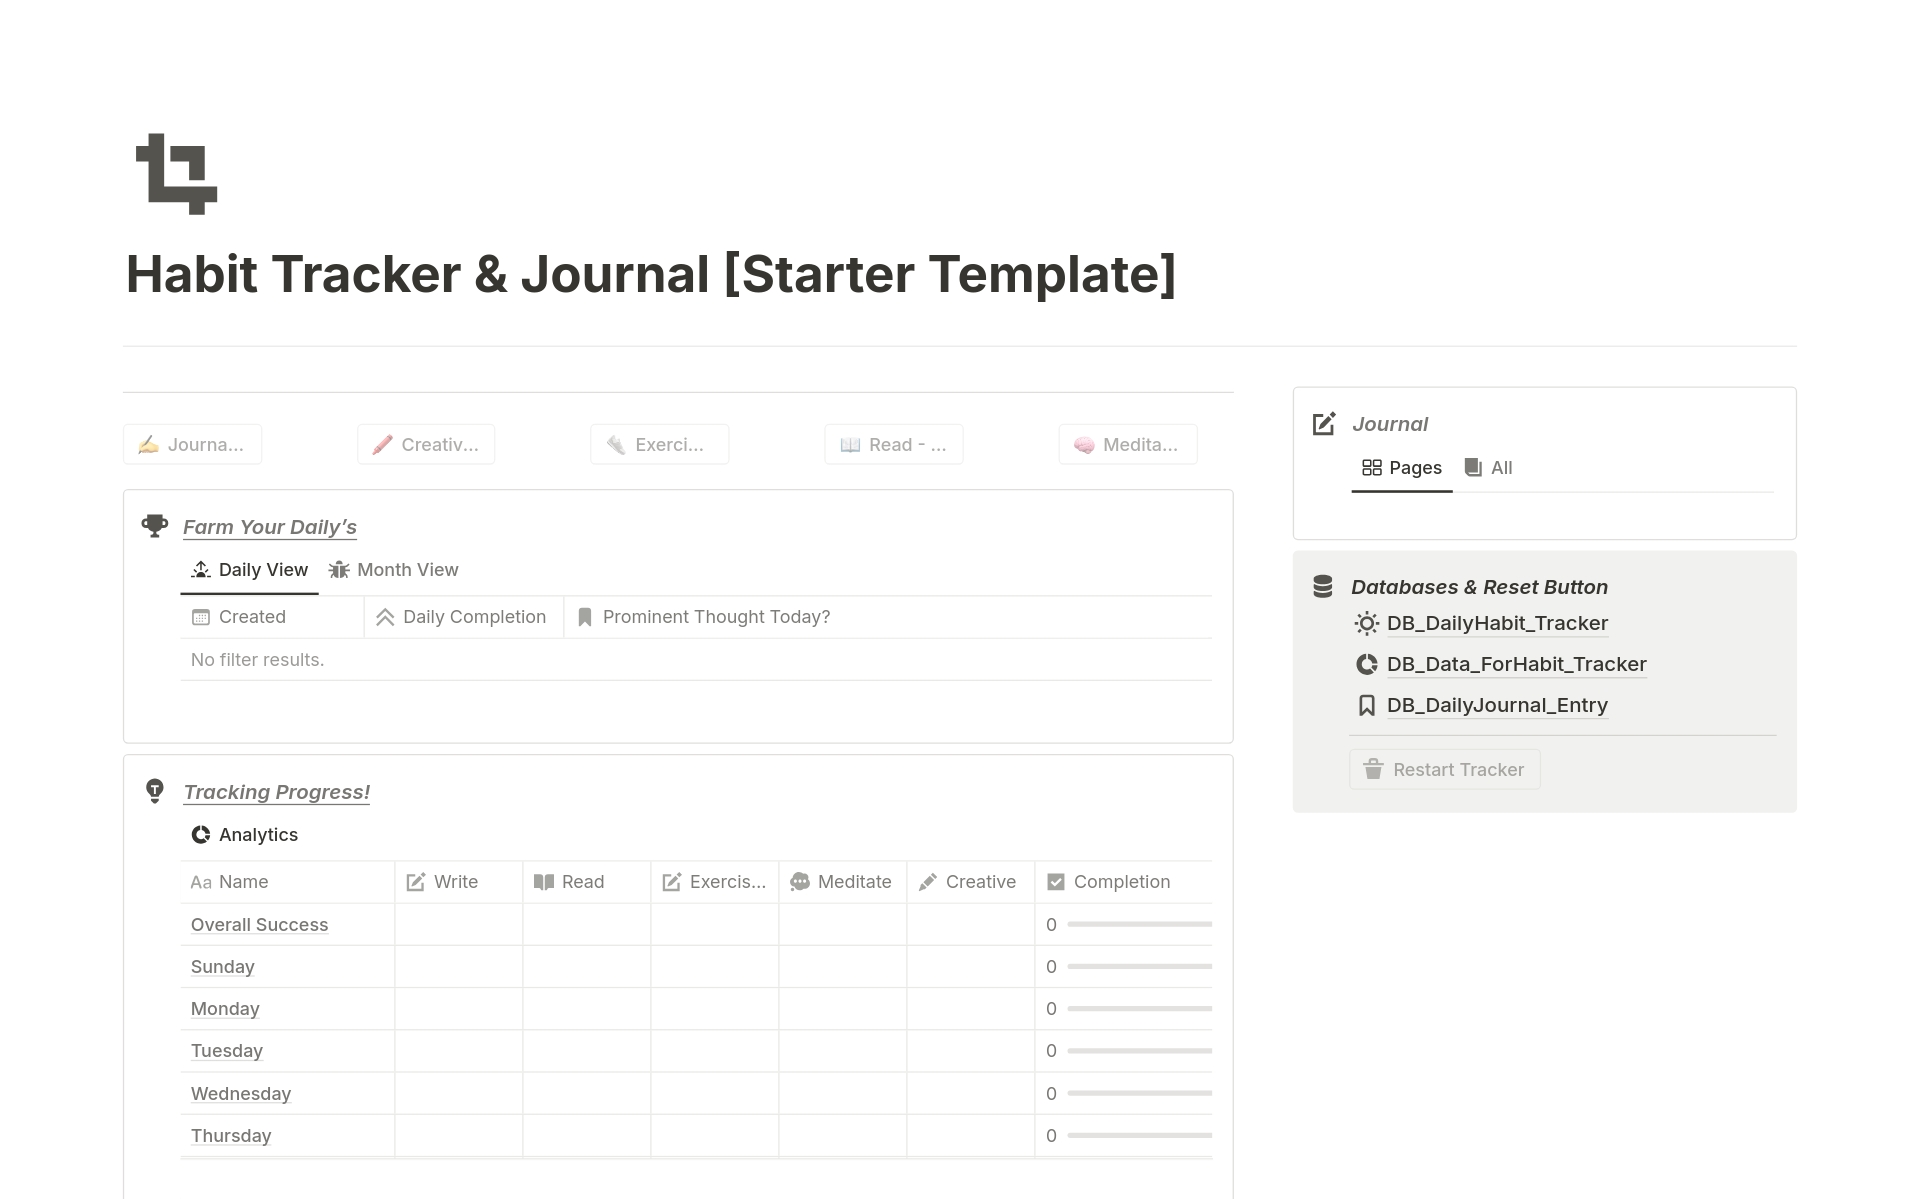 FREE Notion template: Set, track, and analyze your goals. Gain insights into daily habits, reflect with a dedicated journal section, and stay motivated on your journey to success. Download now from Notion.